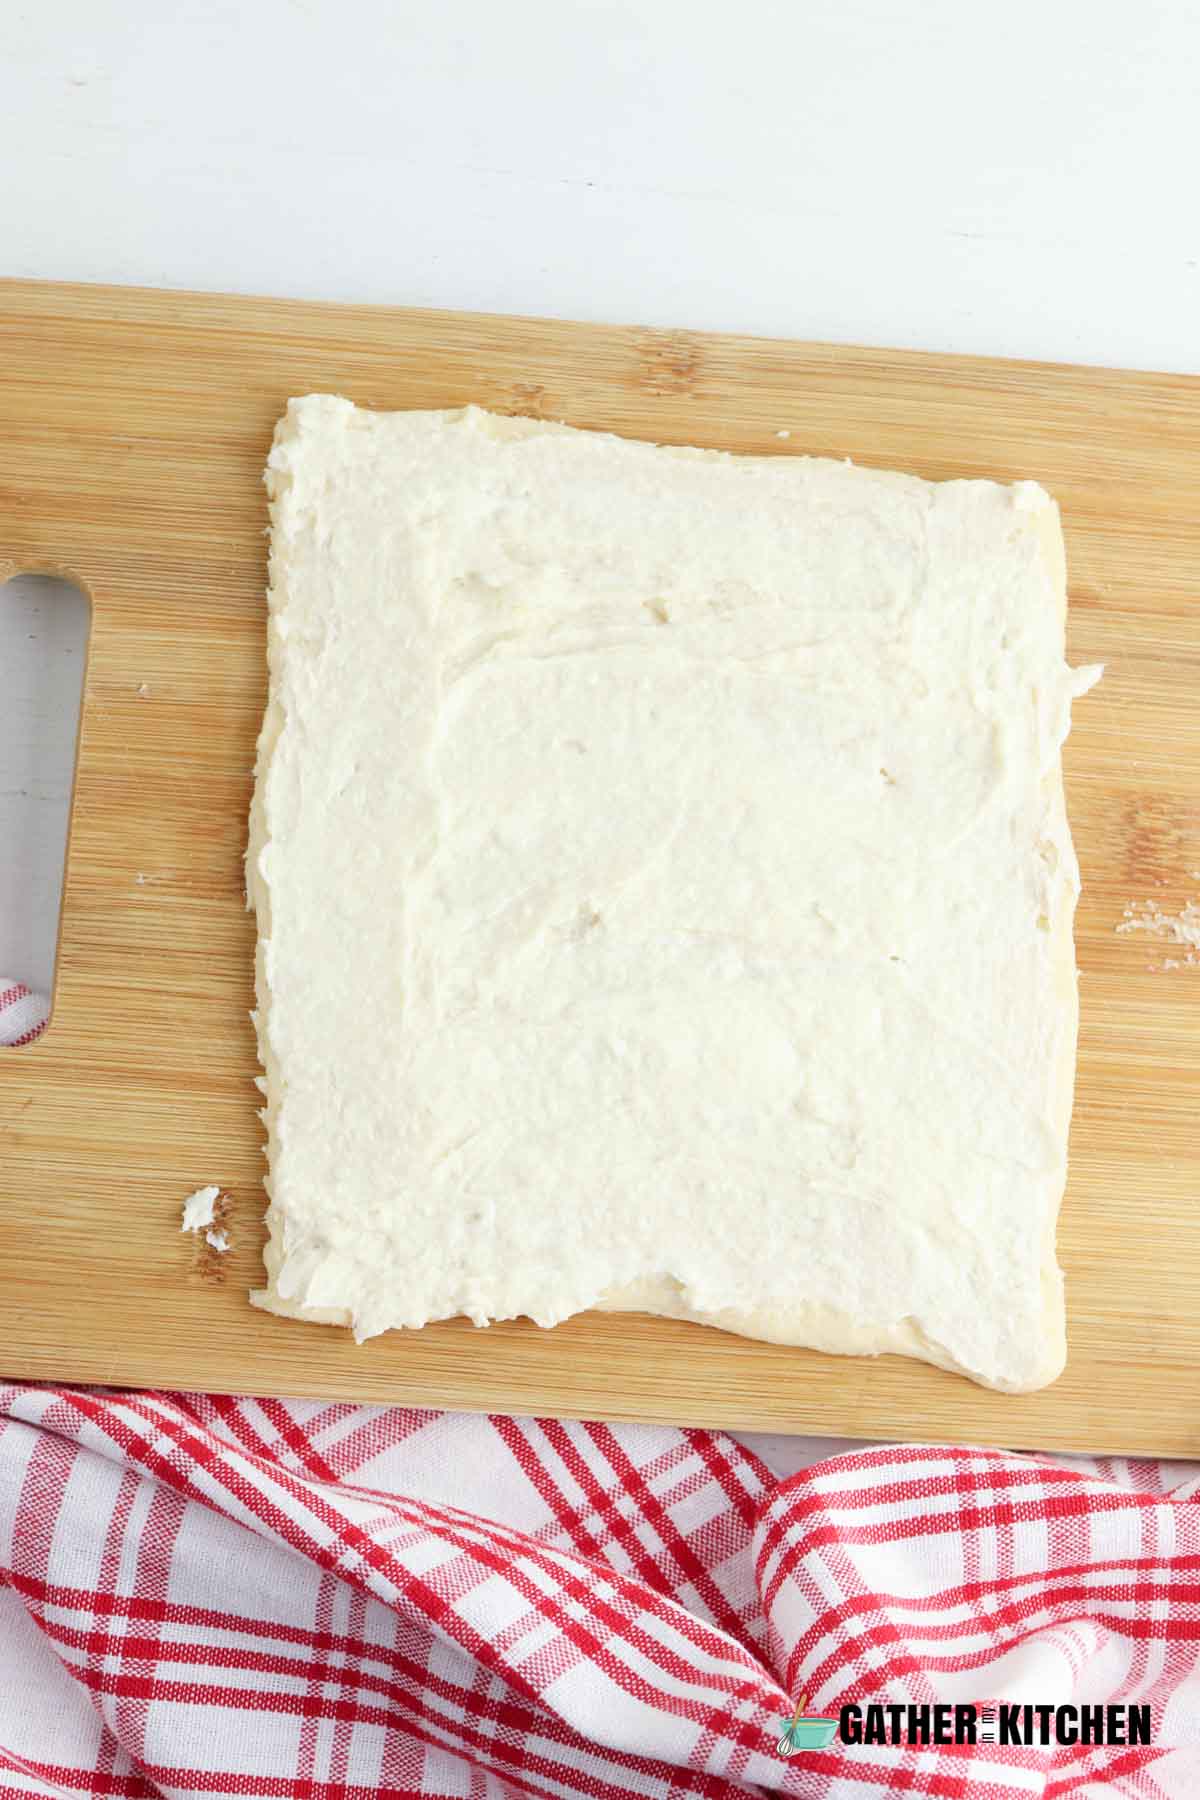 Crescent dough square with cream cheese mixture spread on it.